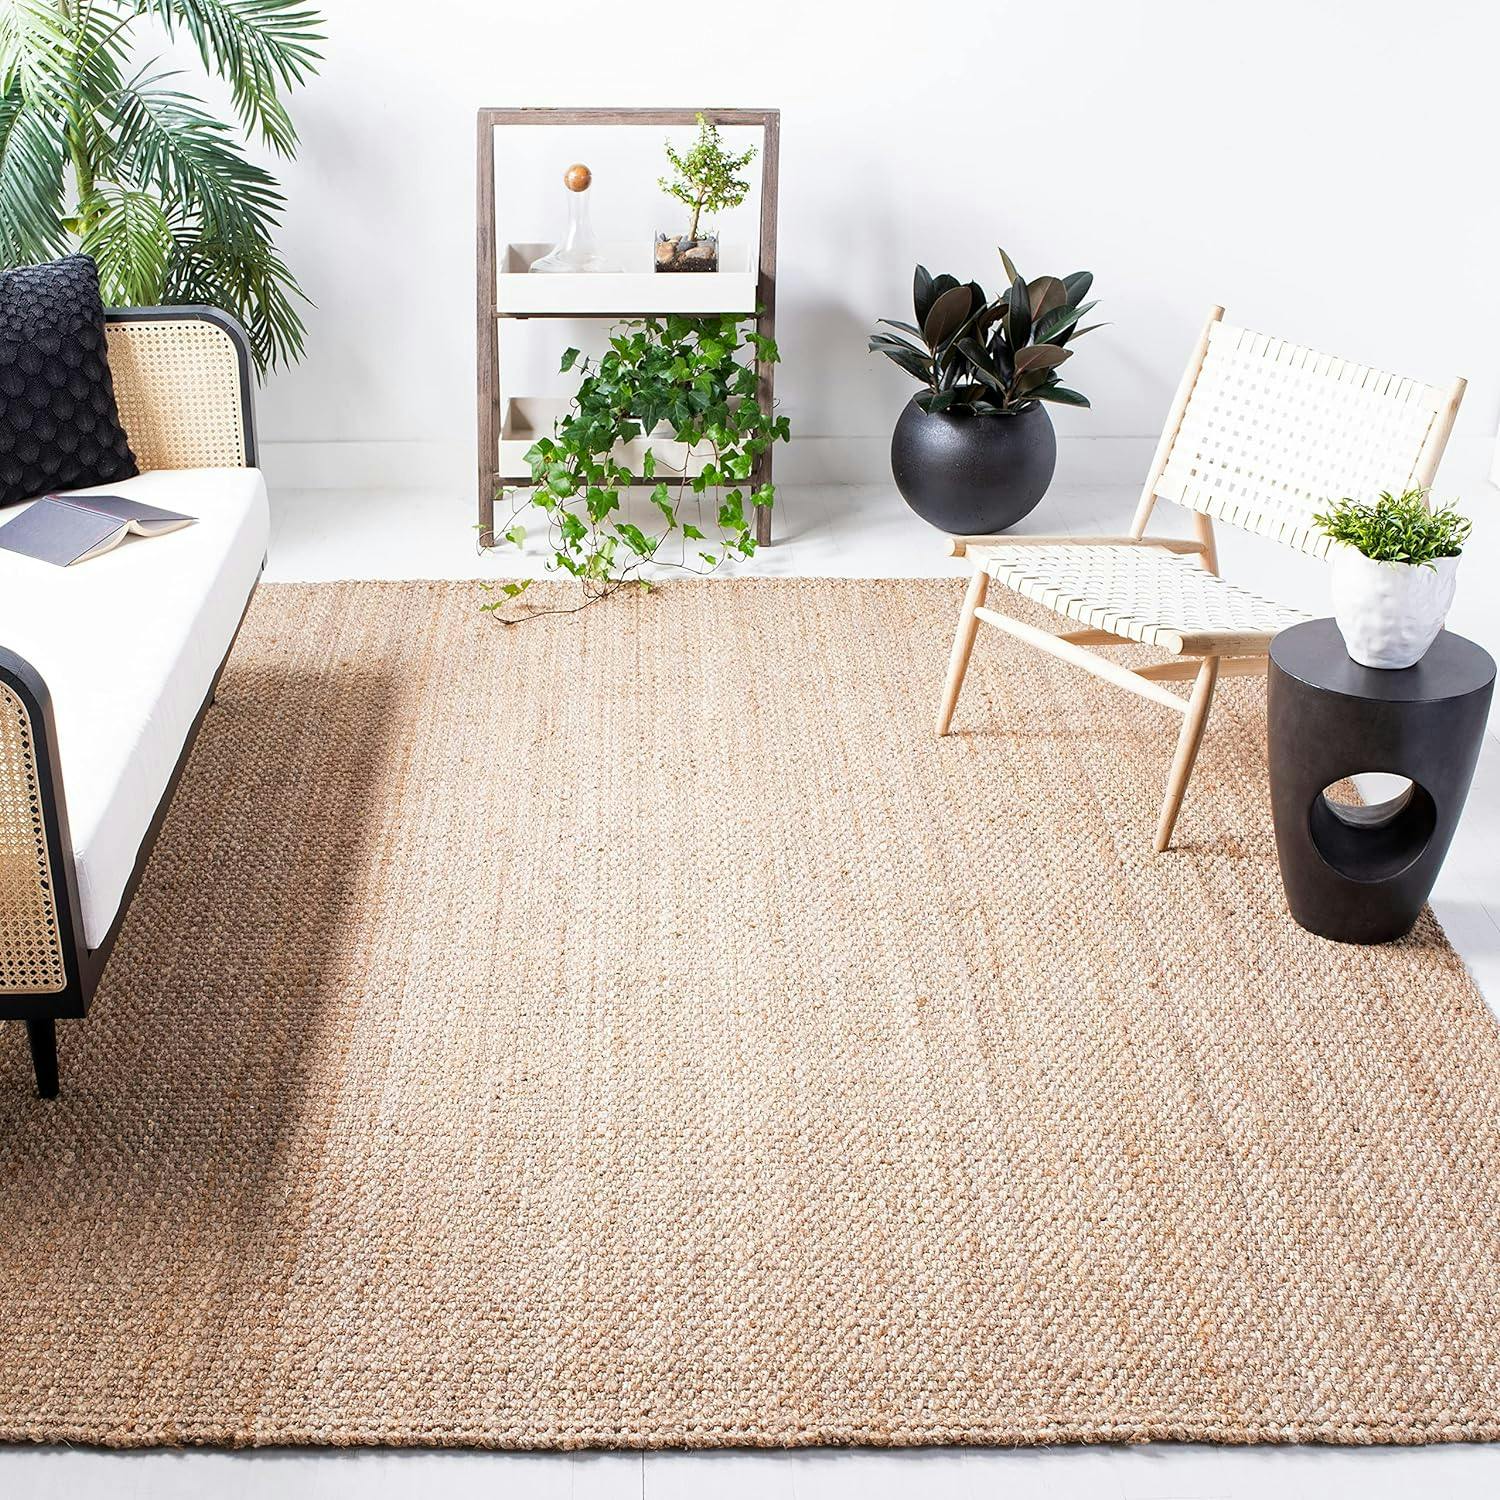 Handwoven Black Jute 4' Square Area Rug, Ideal for High Traffic